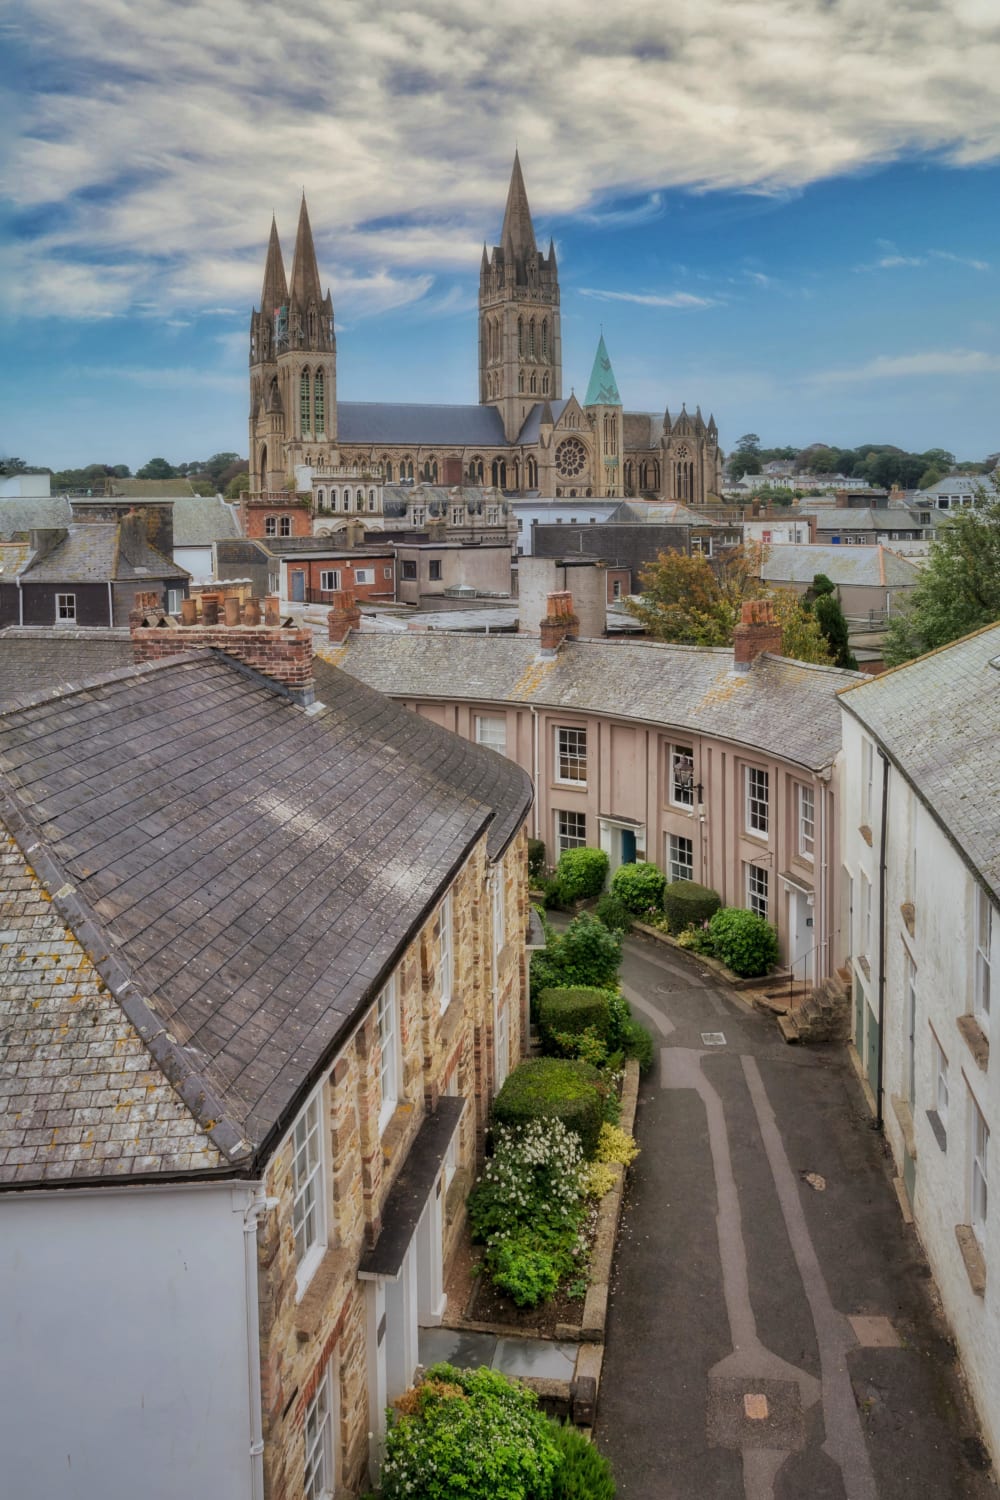 Truro - I know it doesn't look it, but it is a city